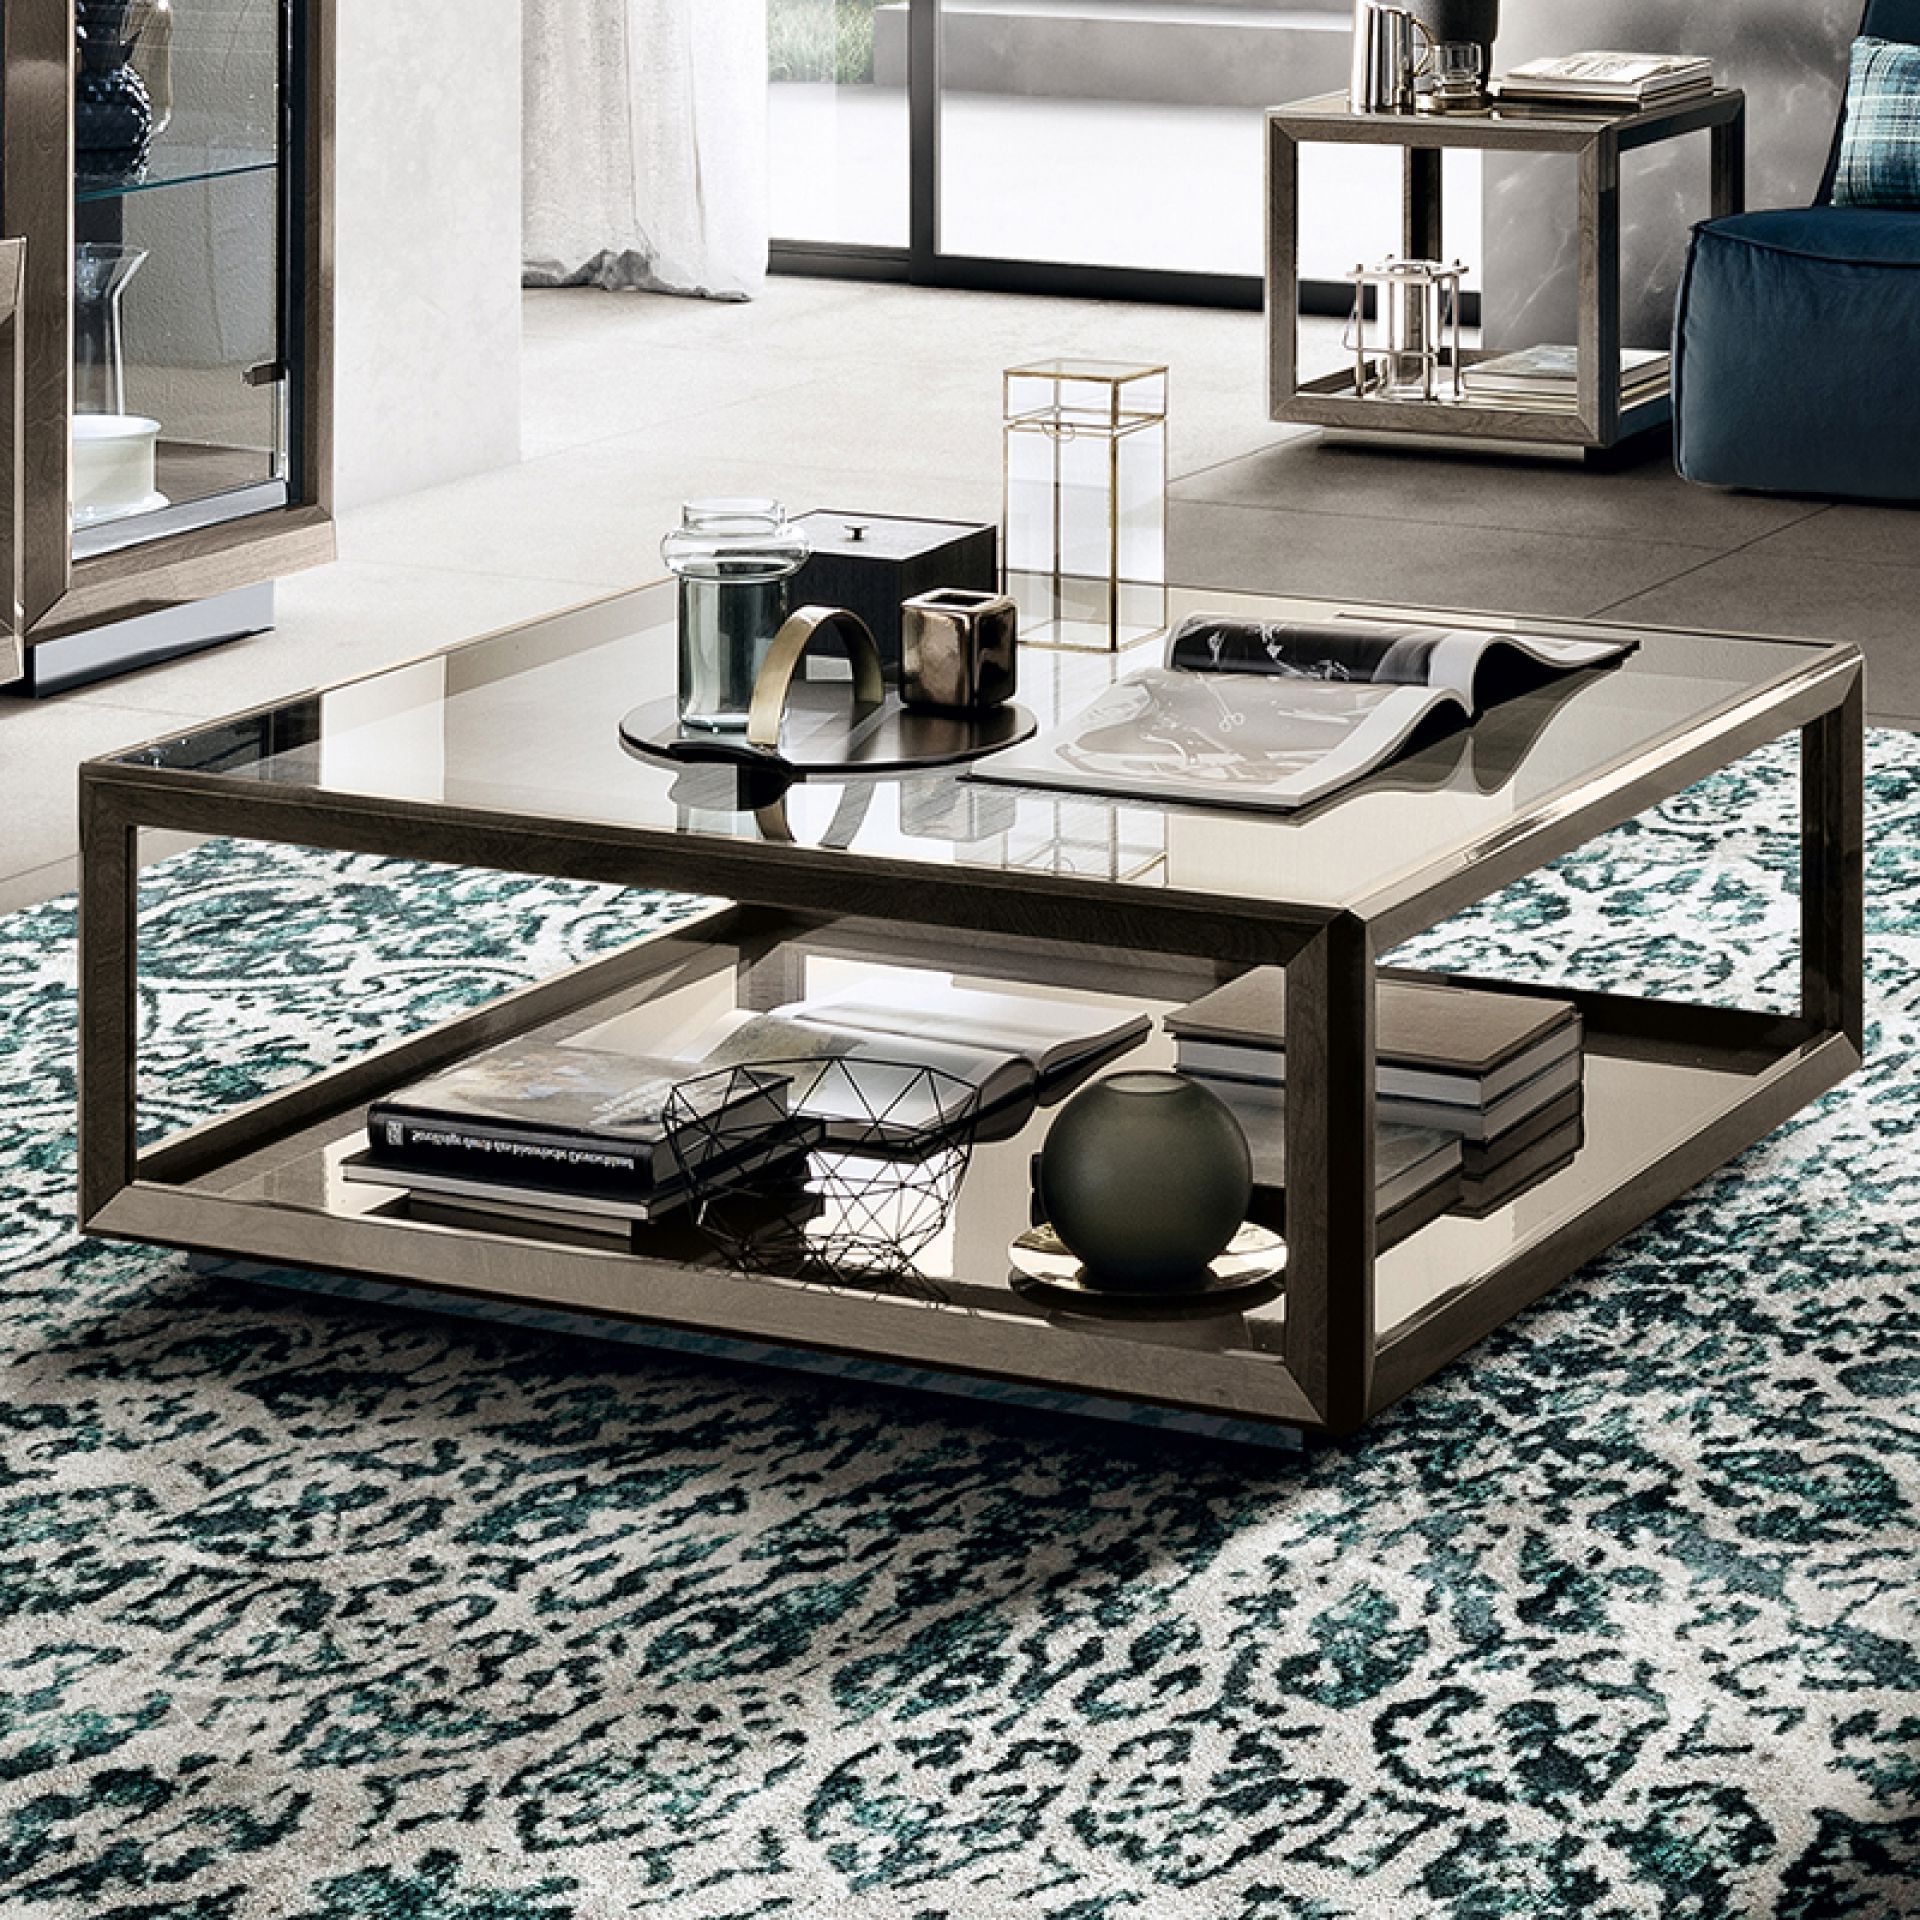 Elisio Silver Birch Square Glass Coffee Table With Widely Used Silver Coffee Tables (View 1 of 10)